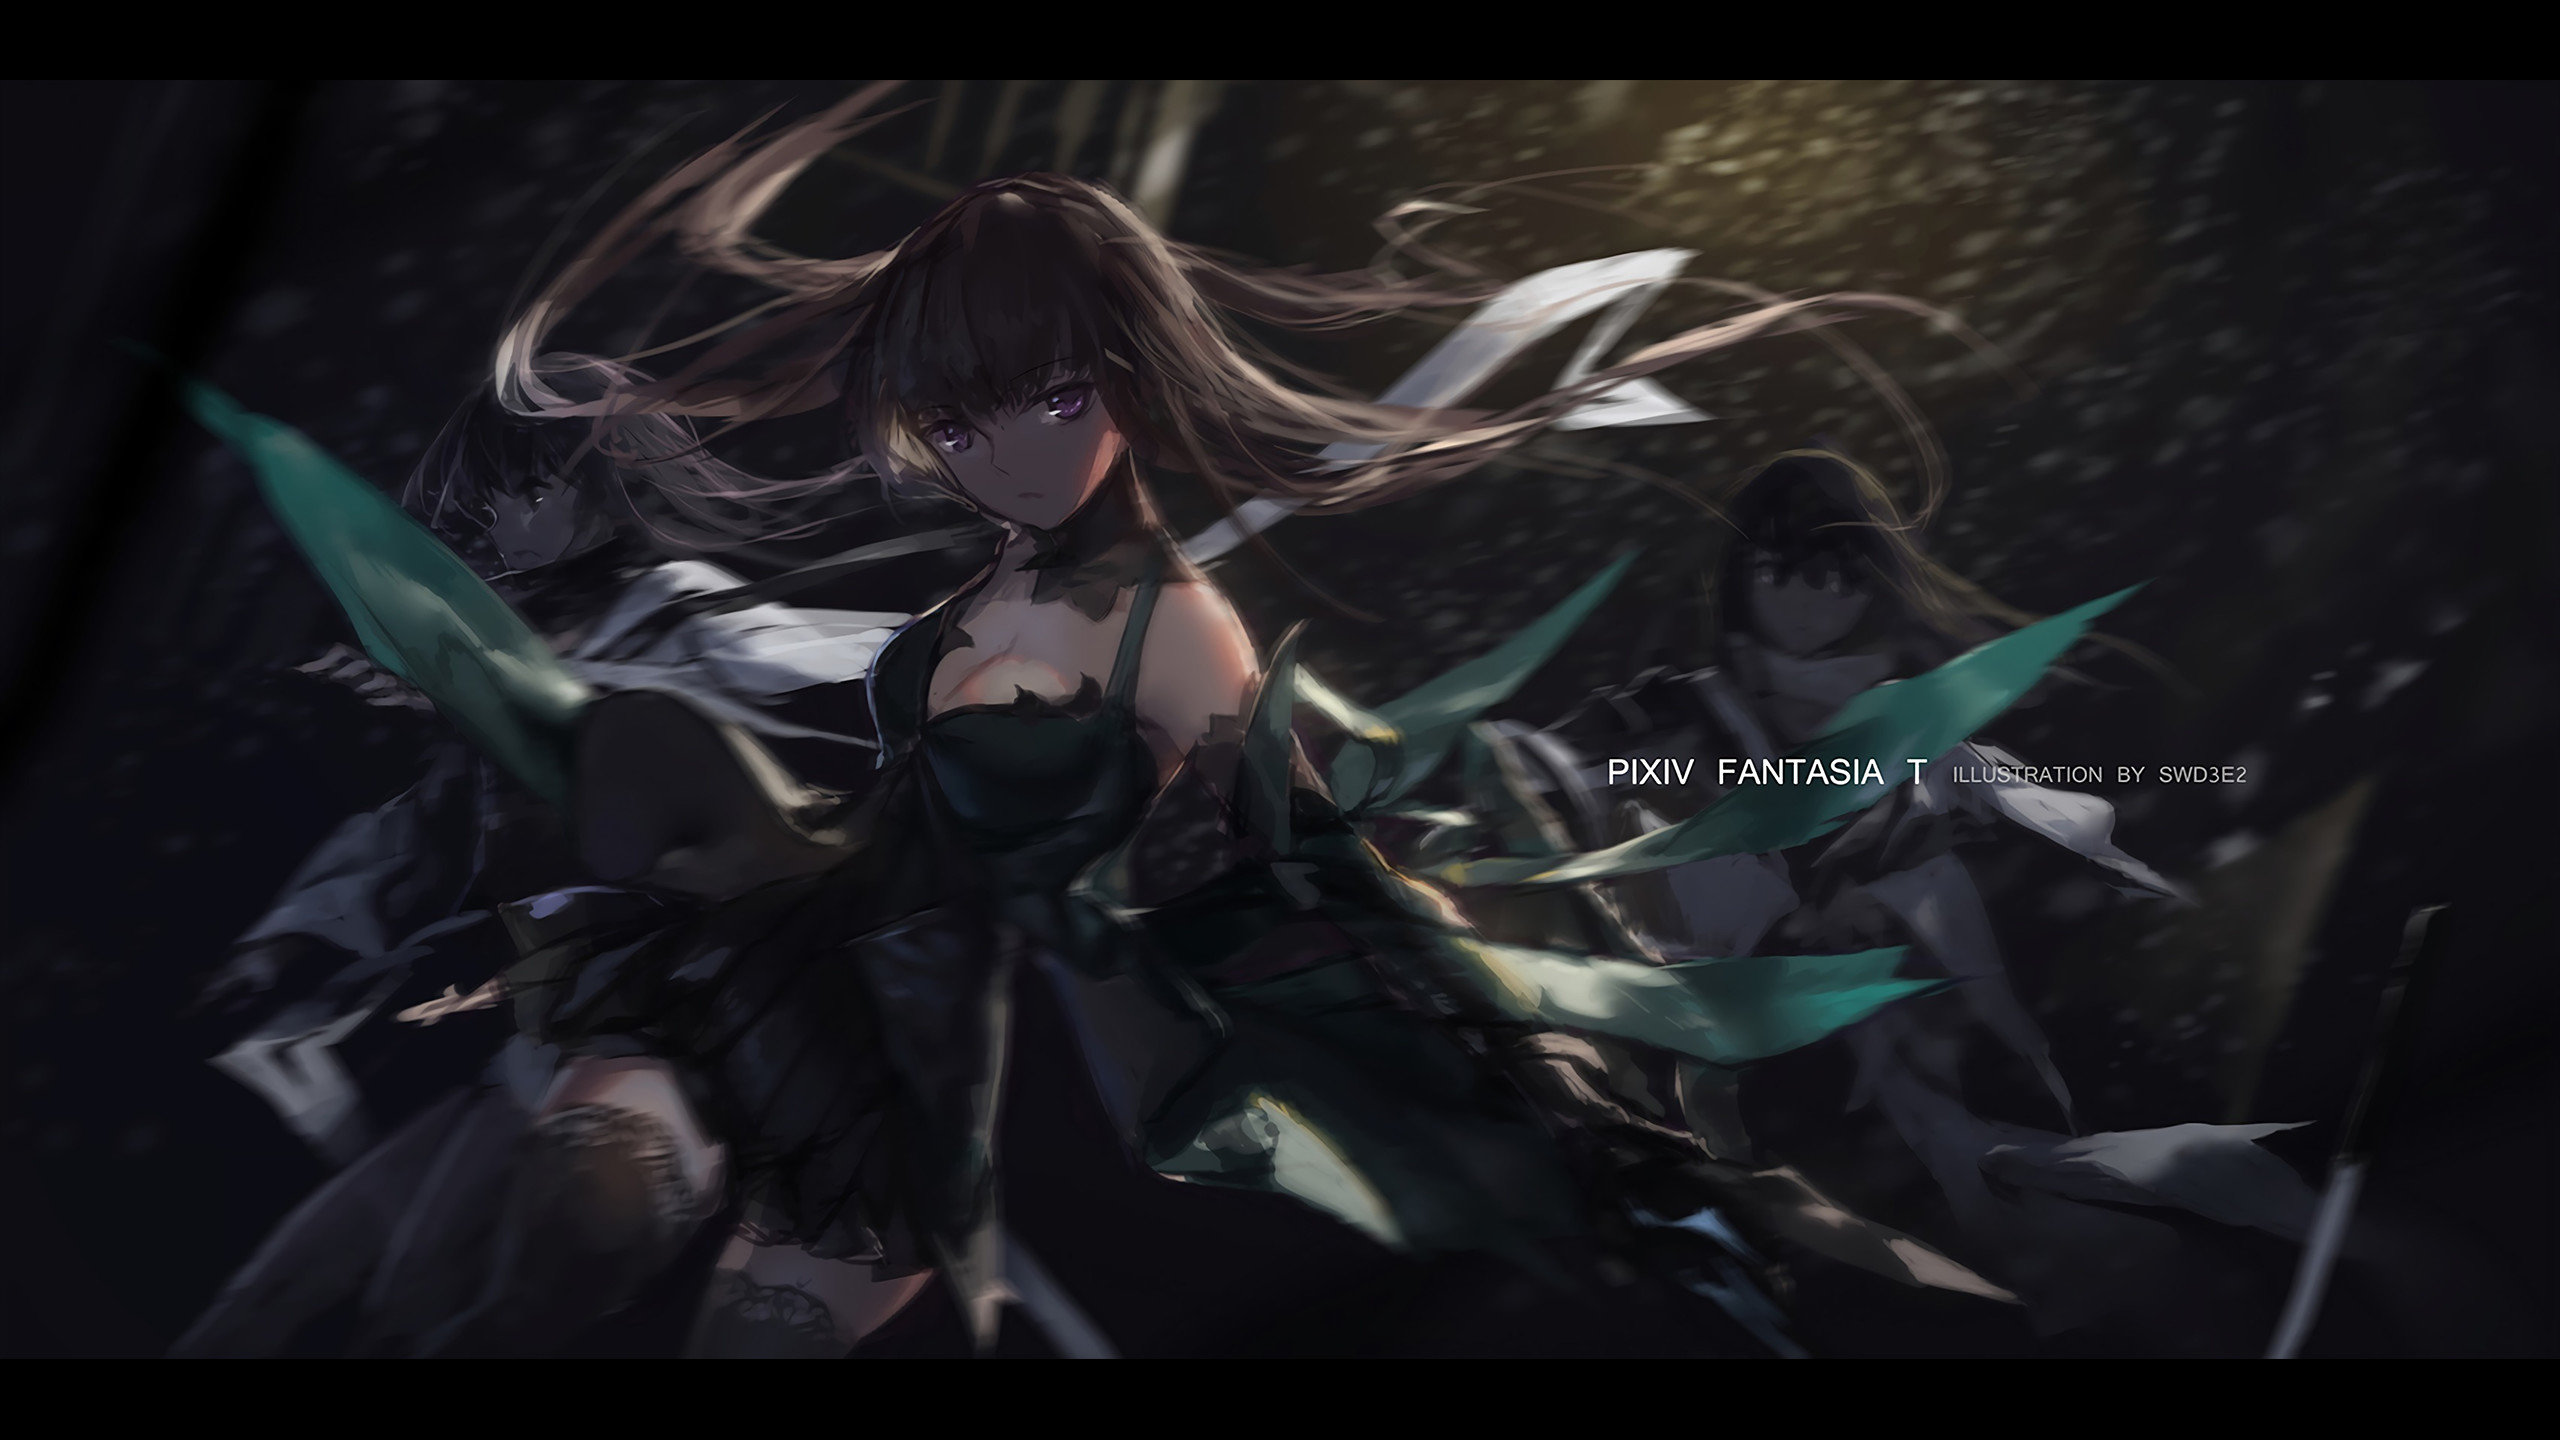 Download hd 2560x1440 Pixiv Fantasia PC background ID:56491 for free